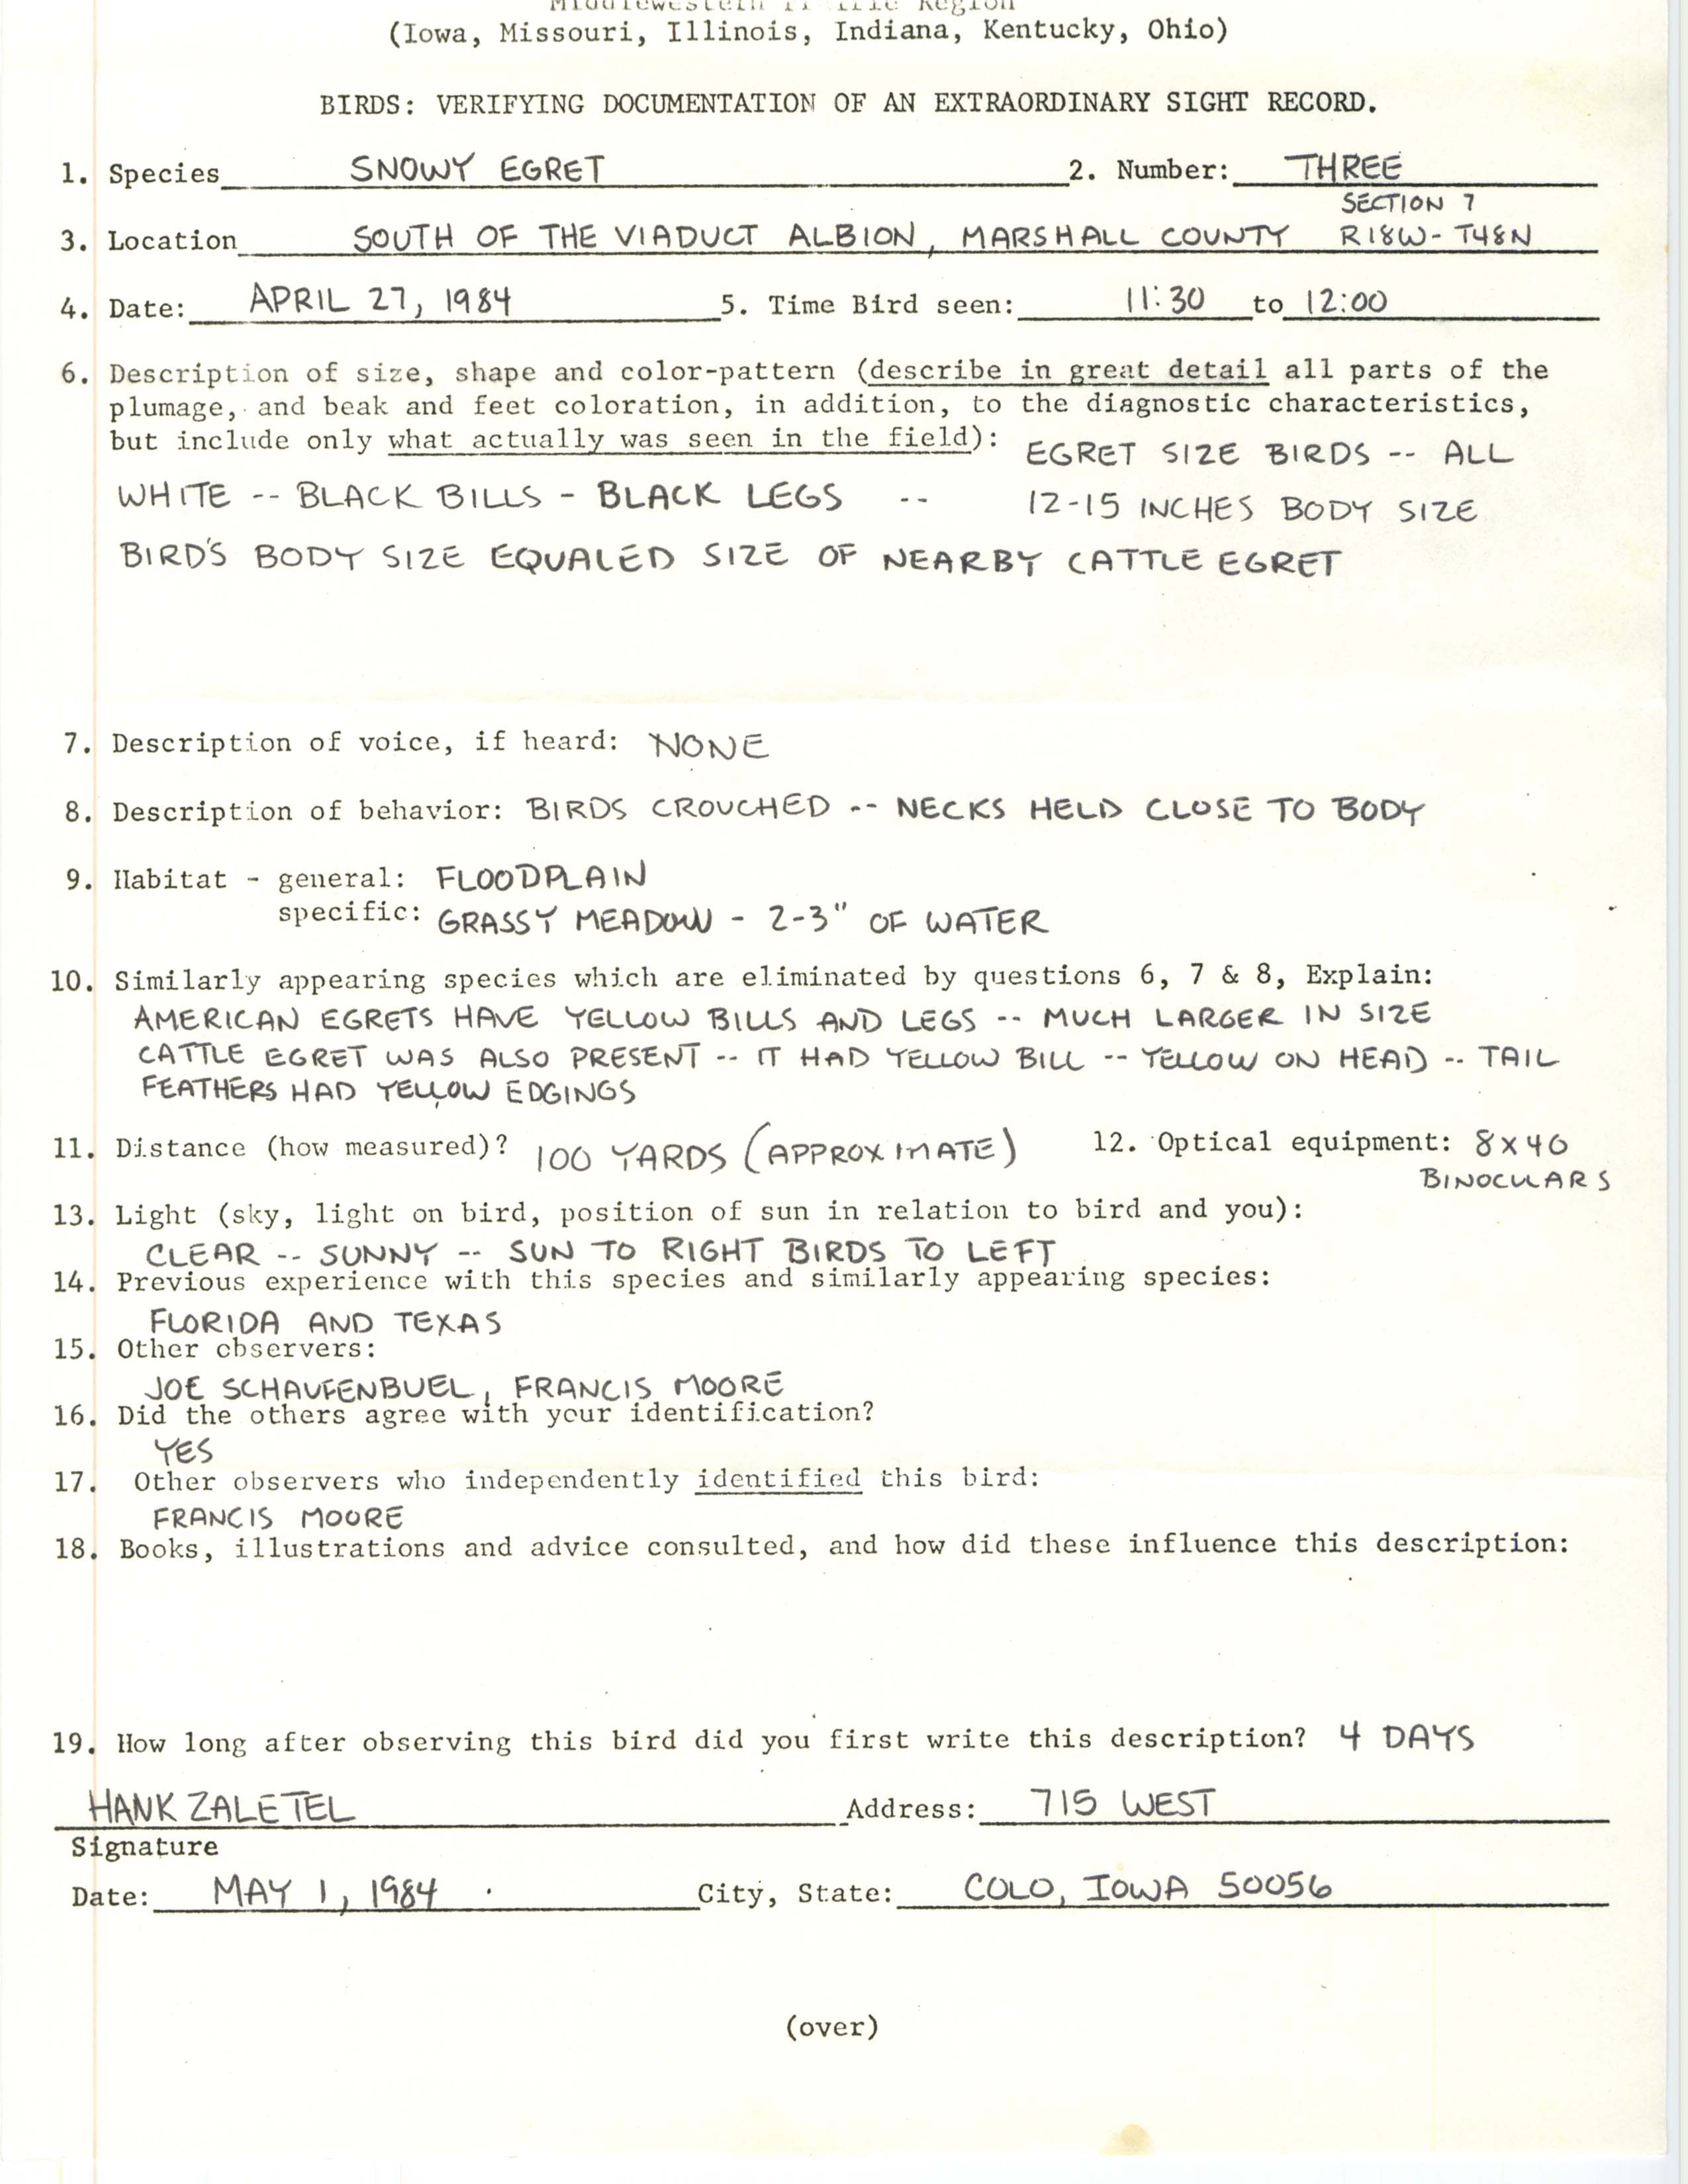 Rare bird documentation form for Snowy Egret at Albion, 1984